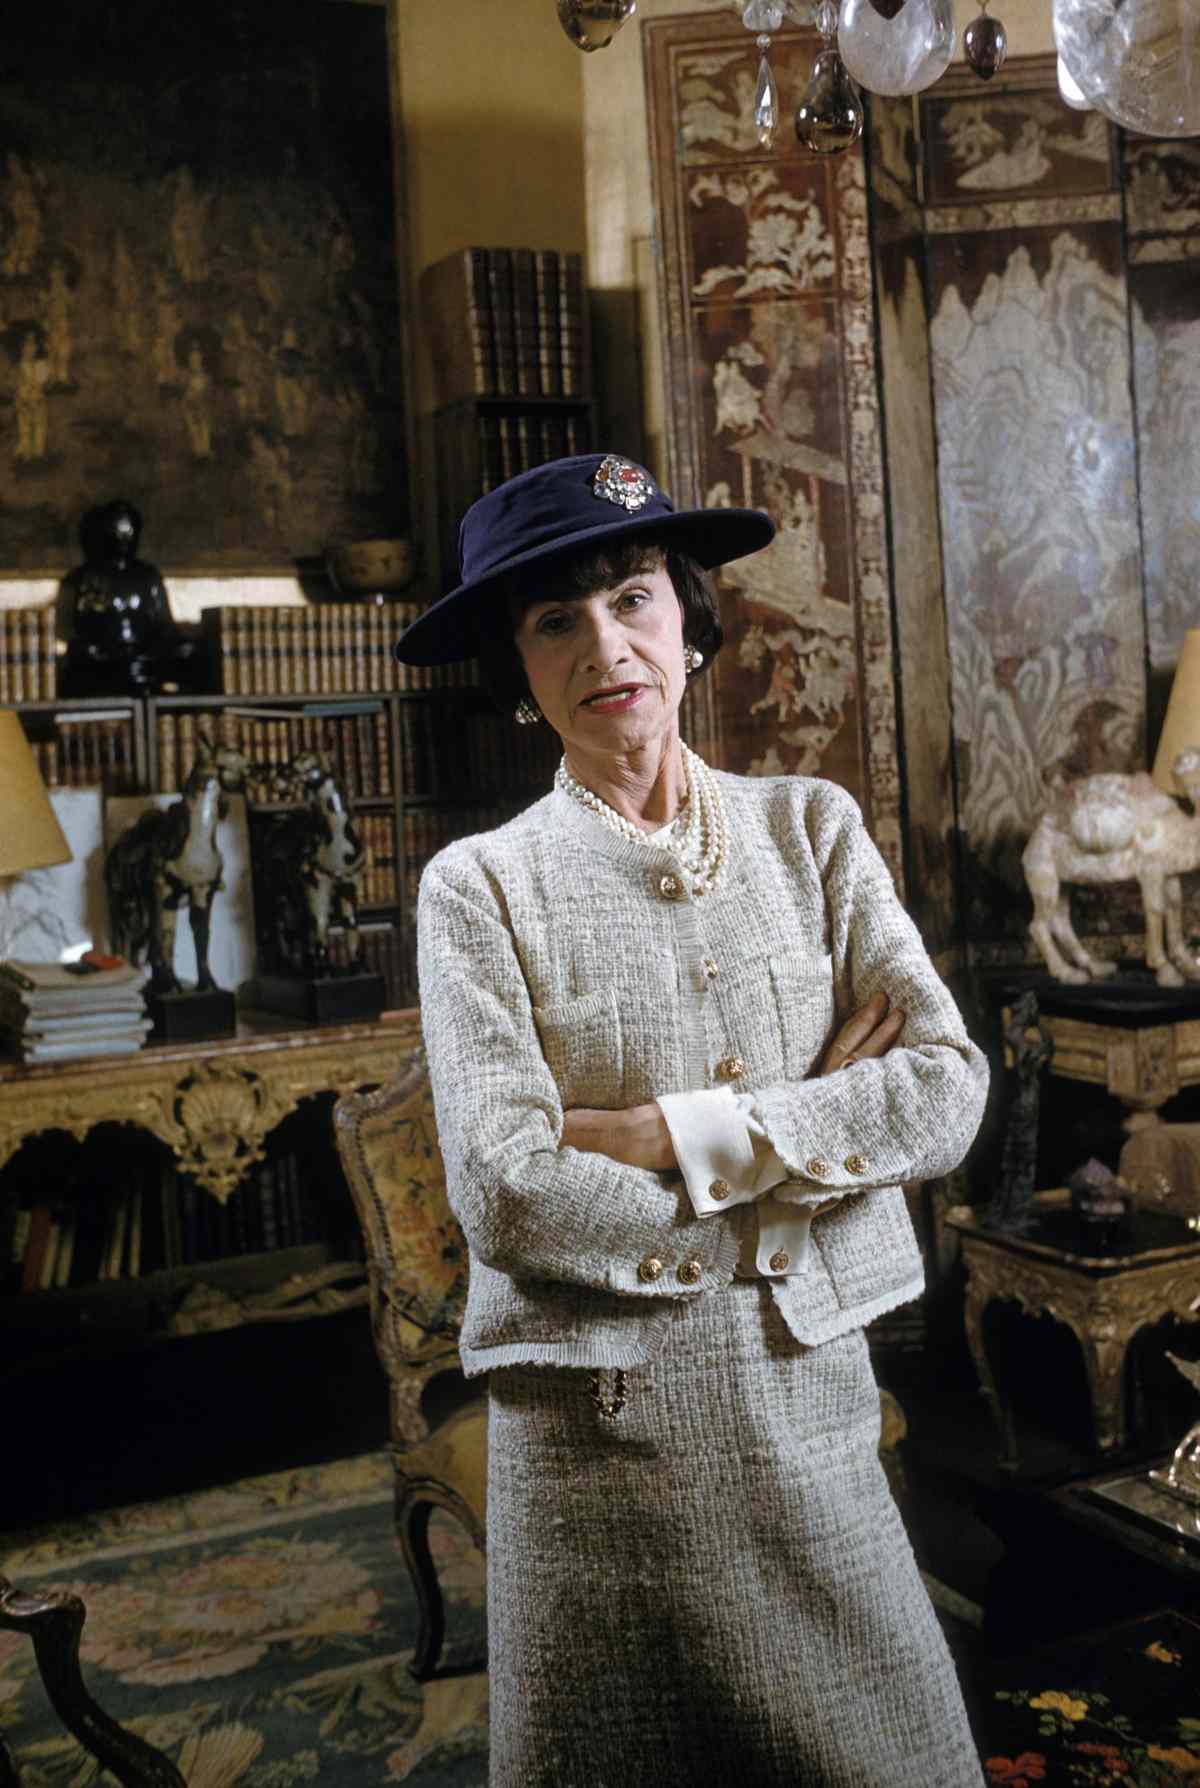 Who Is Coco Chanel? 12 Facts About the Iconic Designer | InStyle